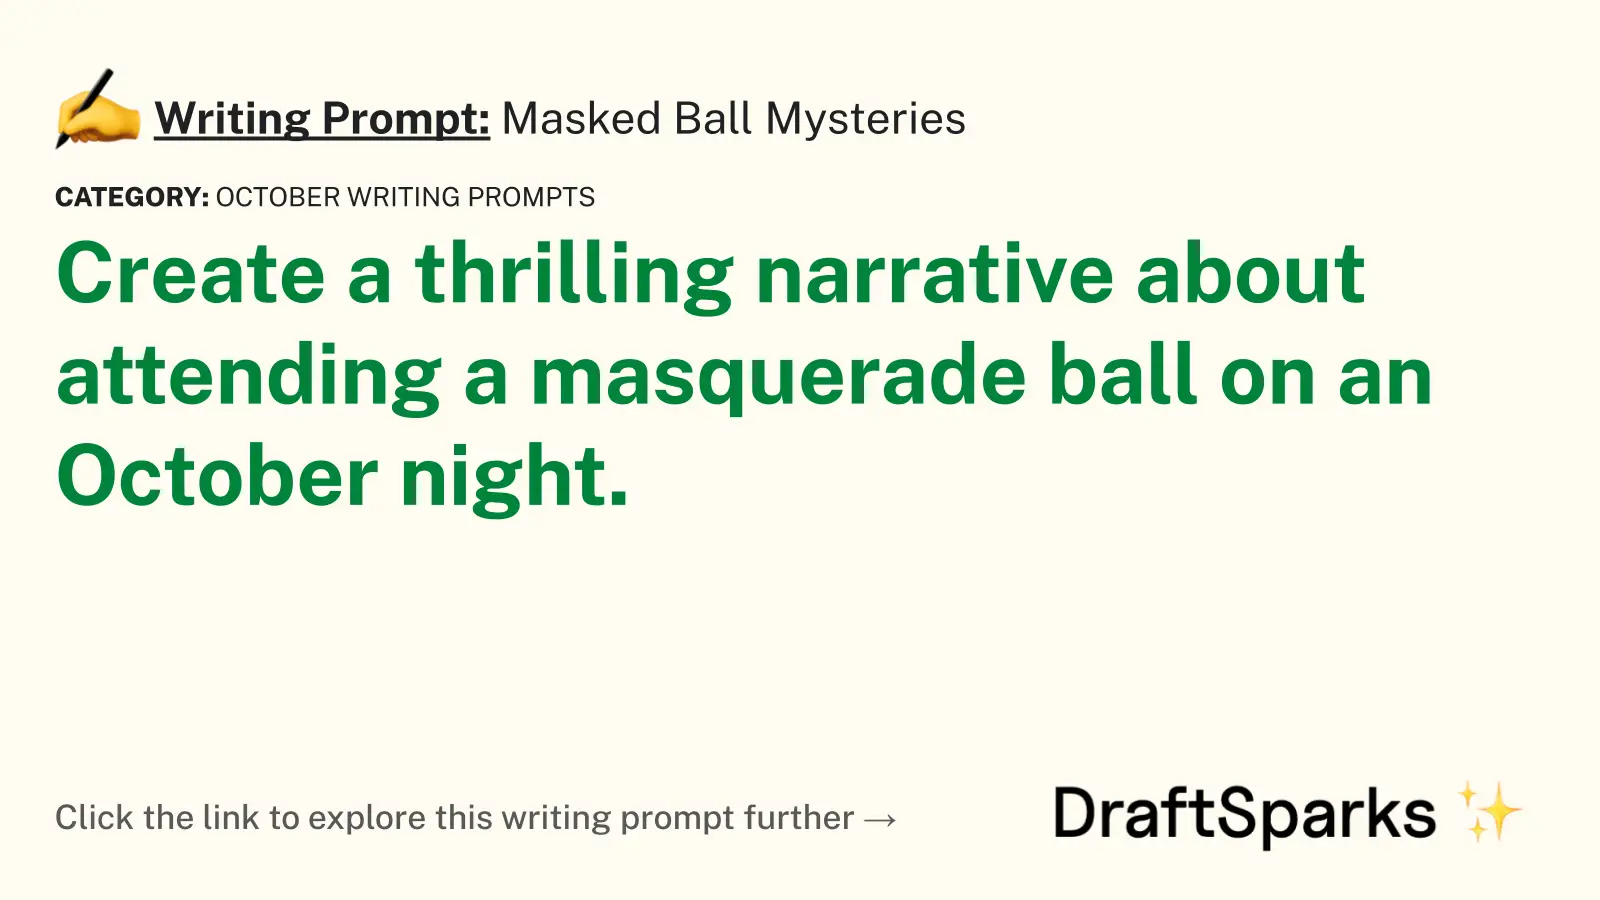 Masked Ball Mysteries